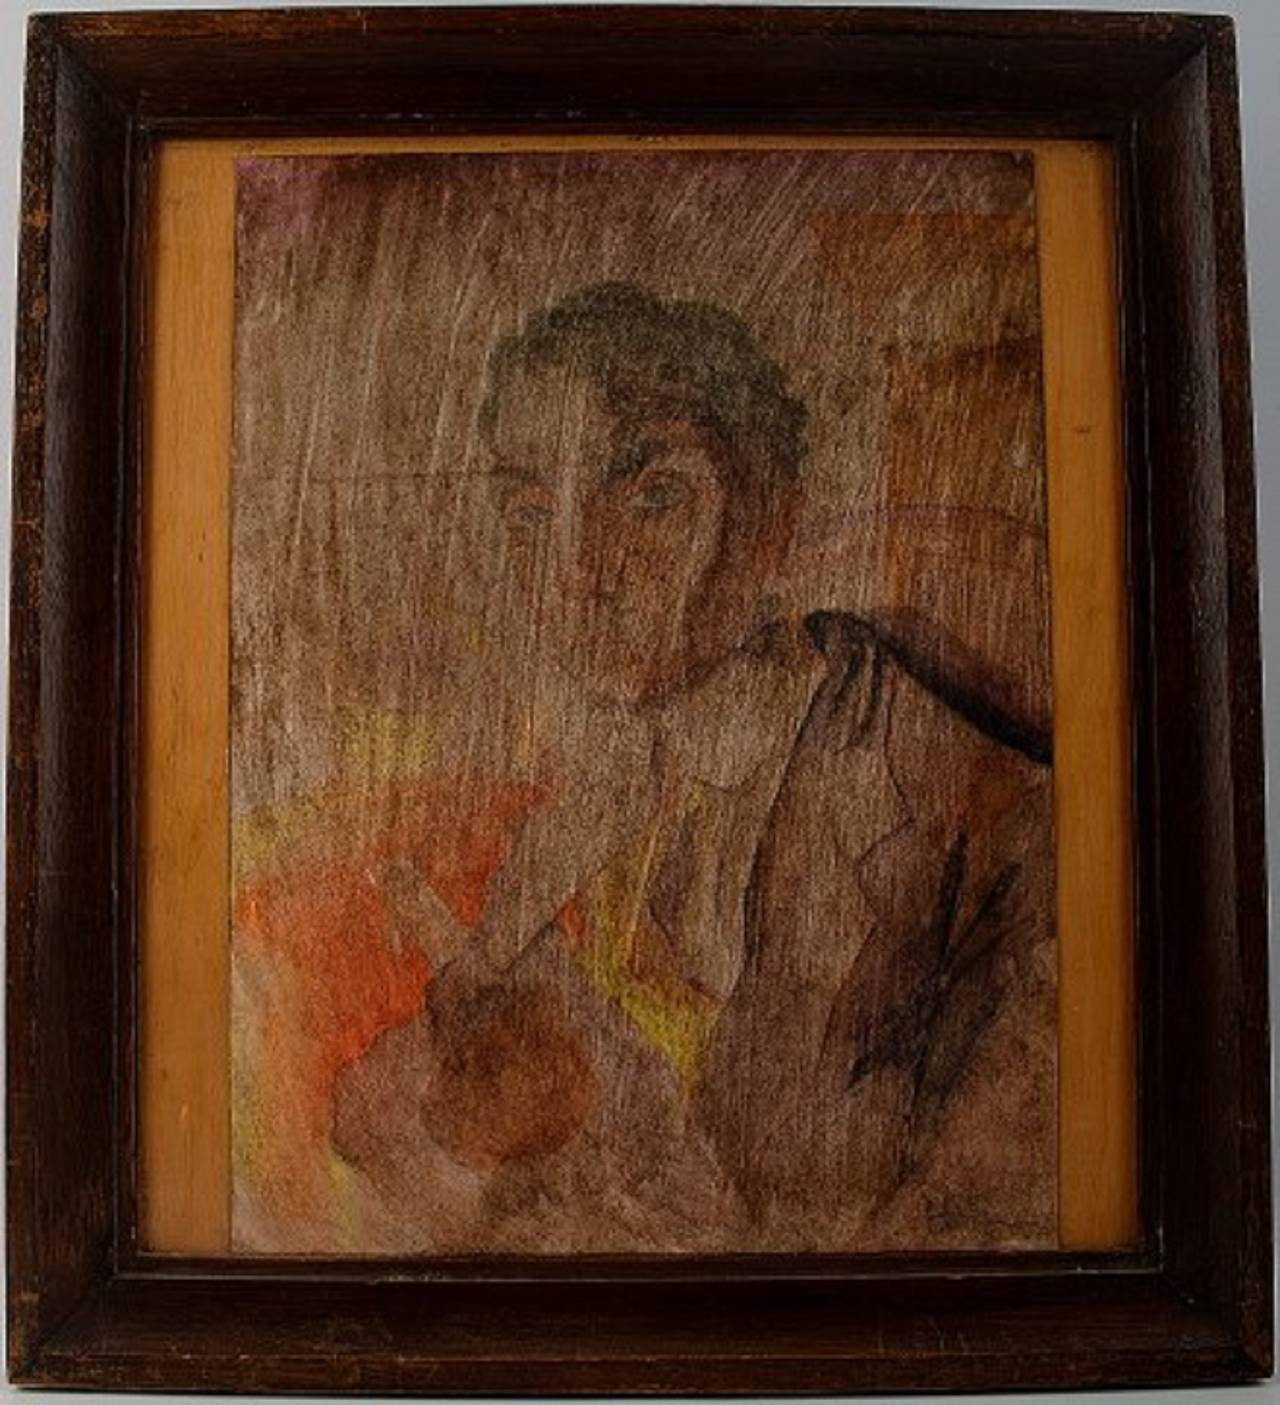 Art deco, portrait of a man, watercolor on paper pasted on wooden board.
Signed illegible lower right.
Approx. 1920s.
In good condition, needs cleaning.
Measures 22 x 30.5 cm. The frame measures 3.5 cm.